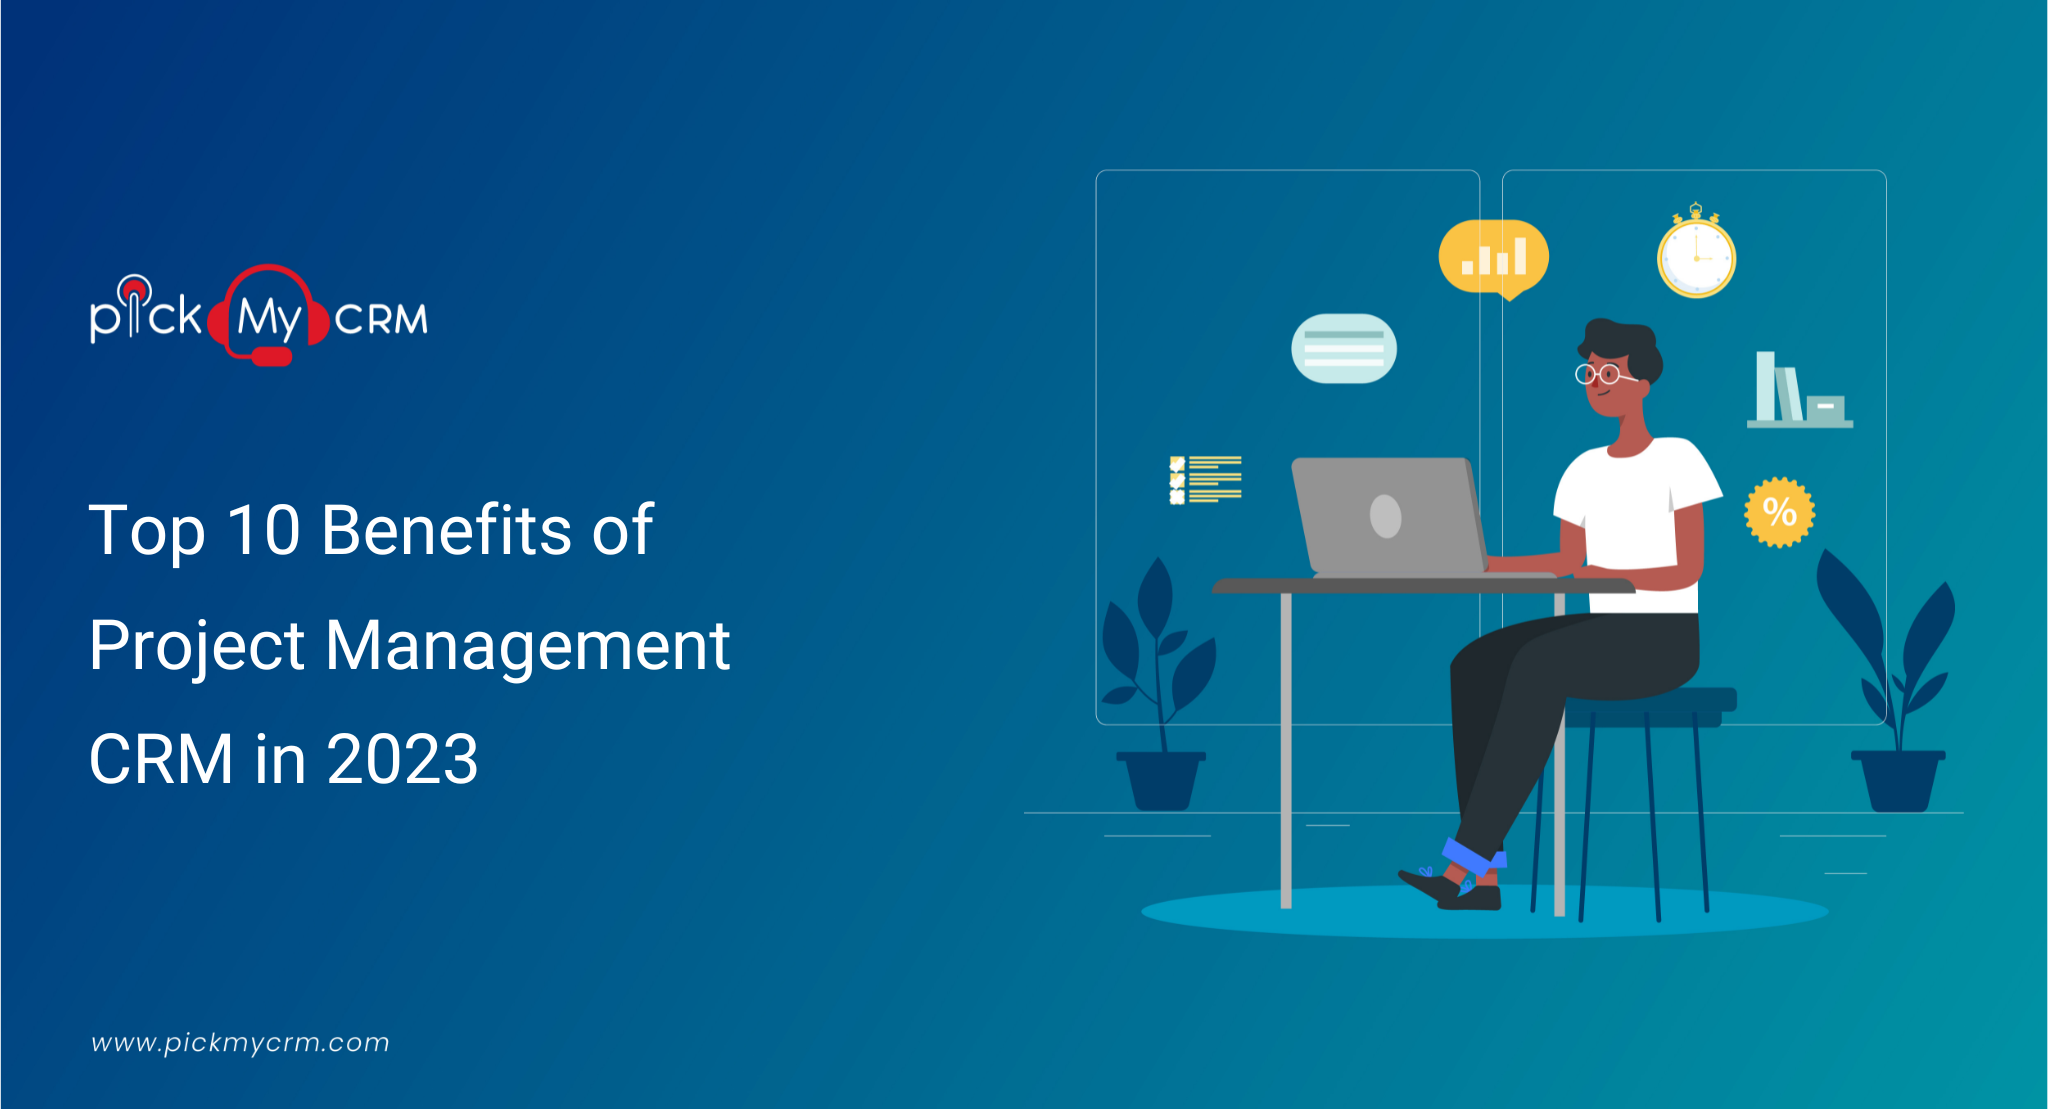 Top 10 Benefits of Project Management CRM in 2023